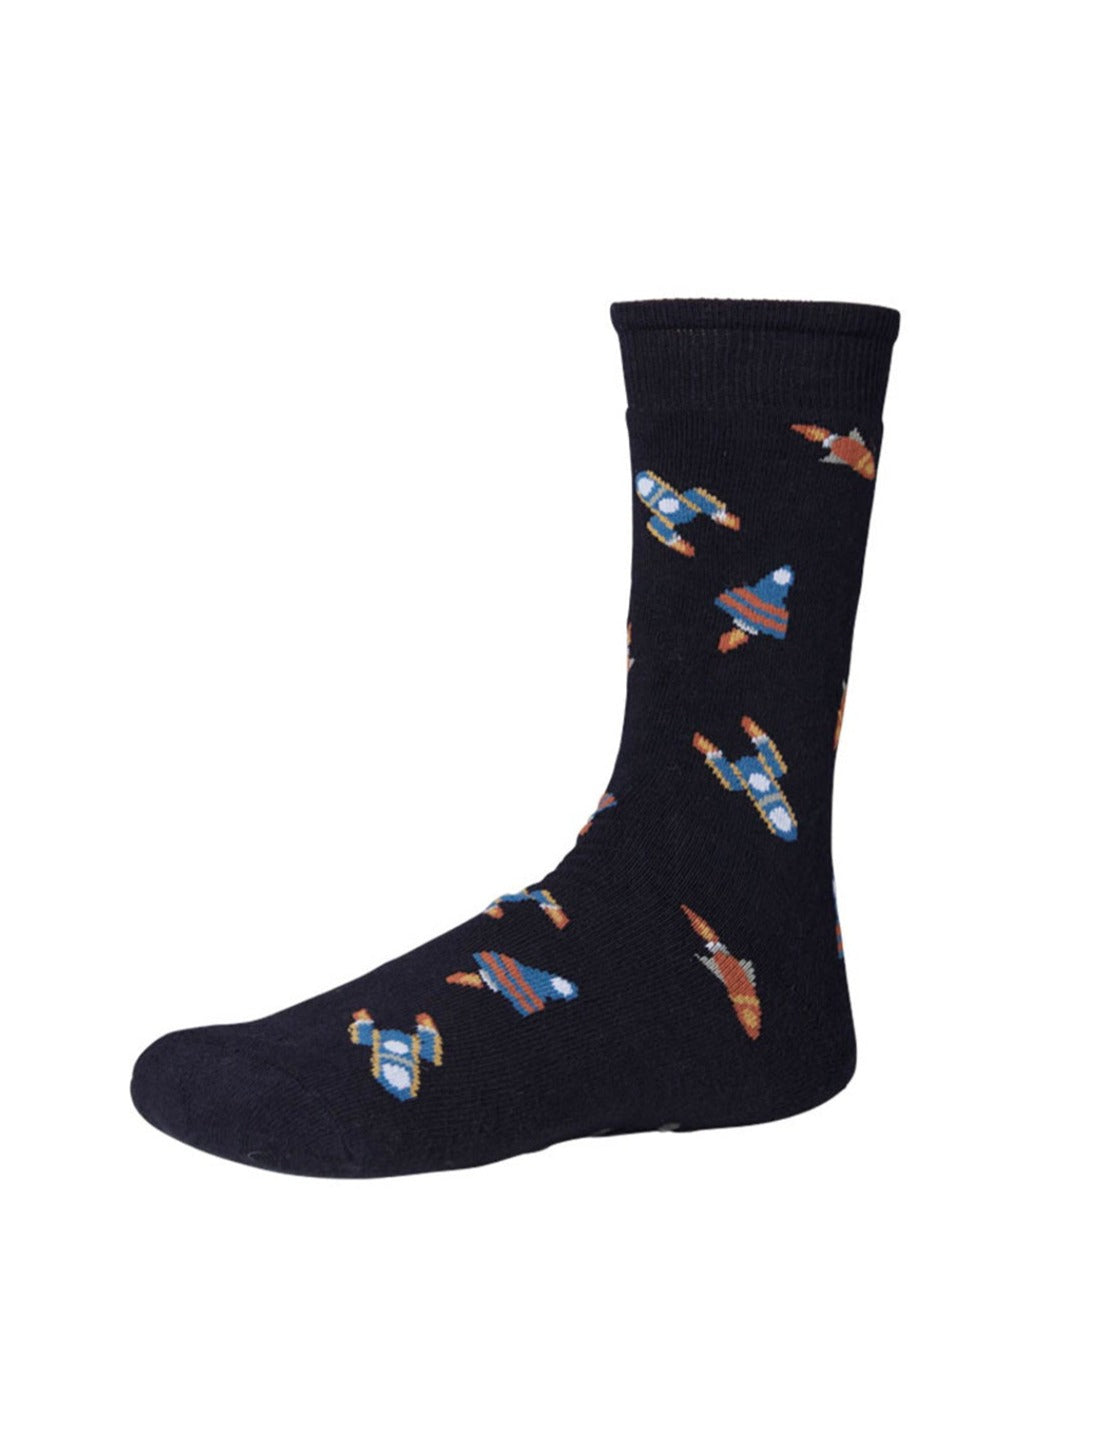 Ysabel Mora 22795 Rocket Sock - Thick black cotton slipper socks with an all over rockets and space ship pattern and dotted non-slip gripper sole.